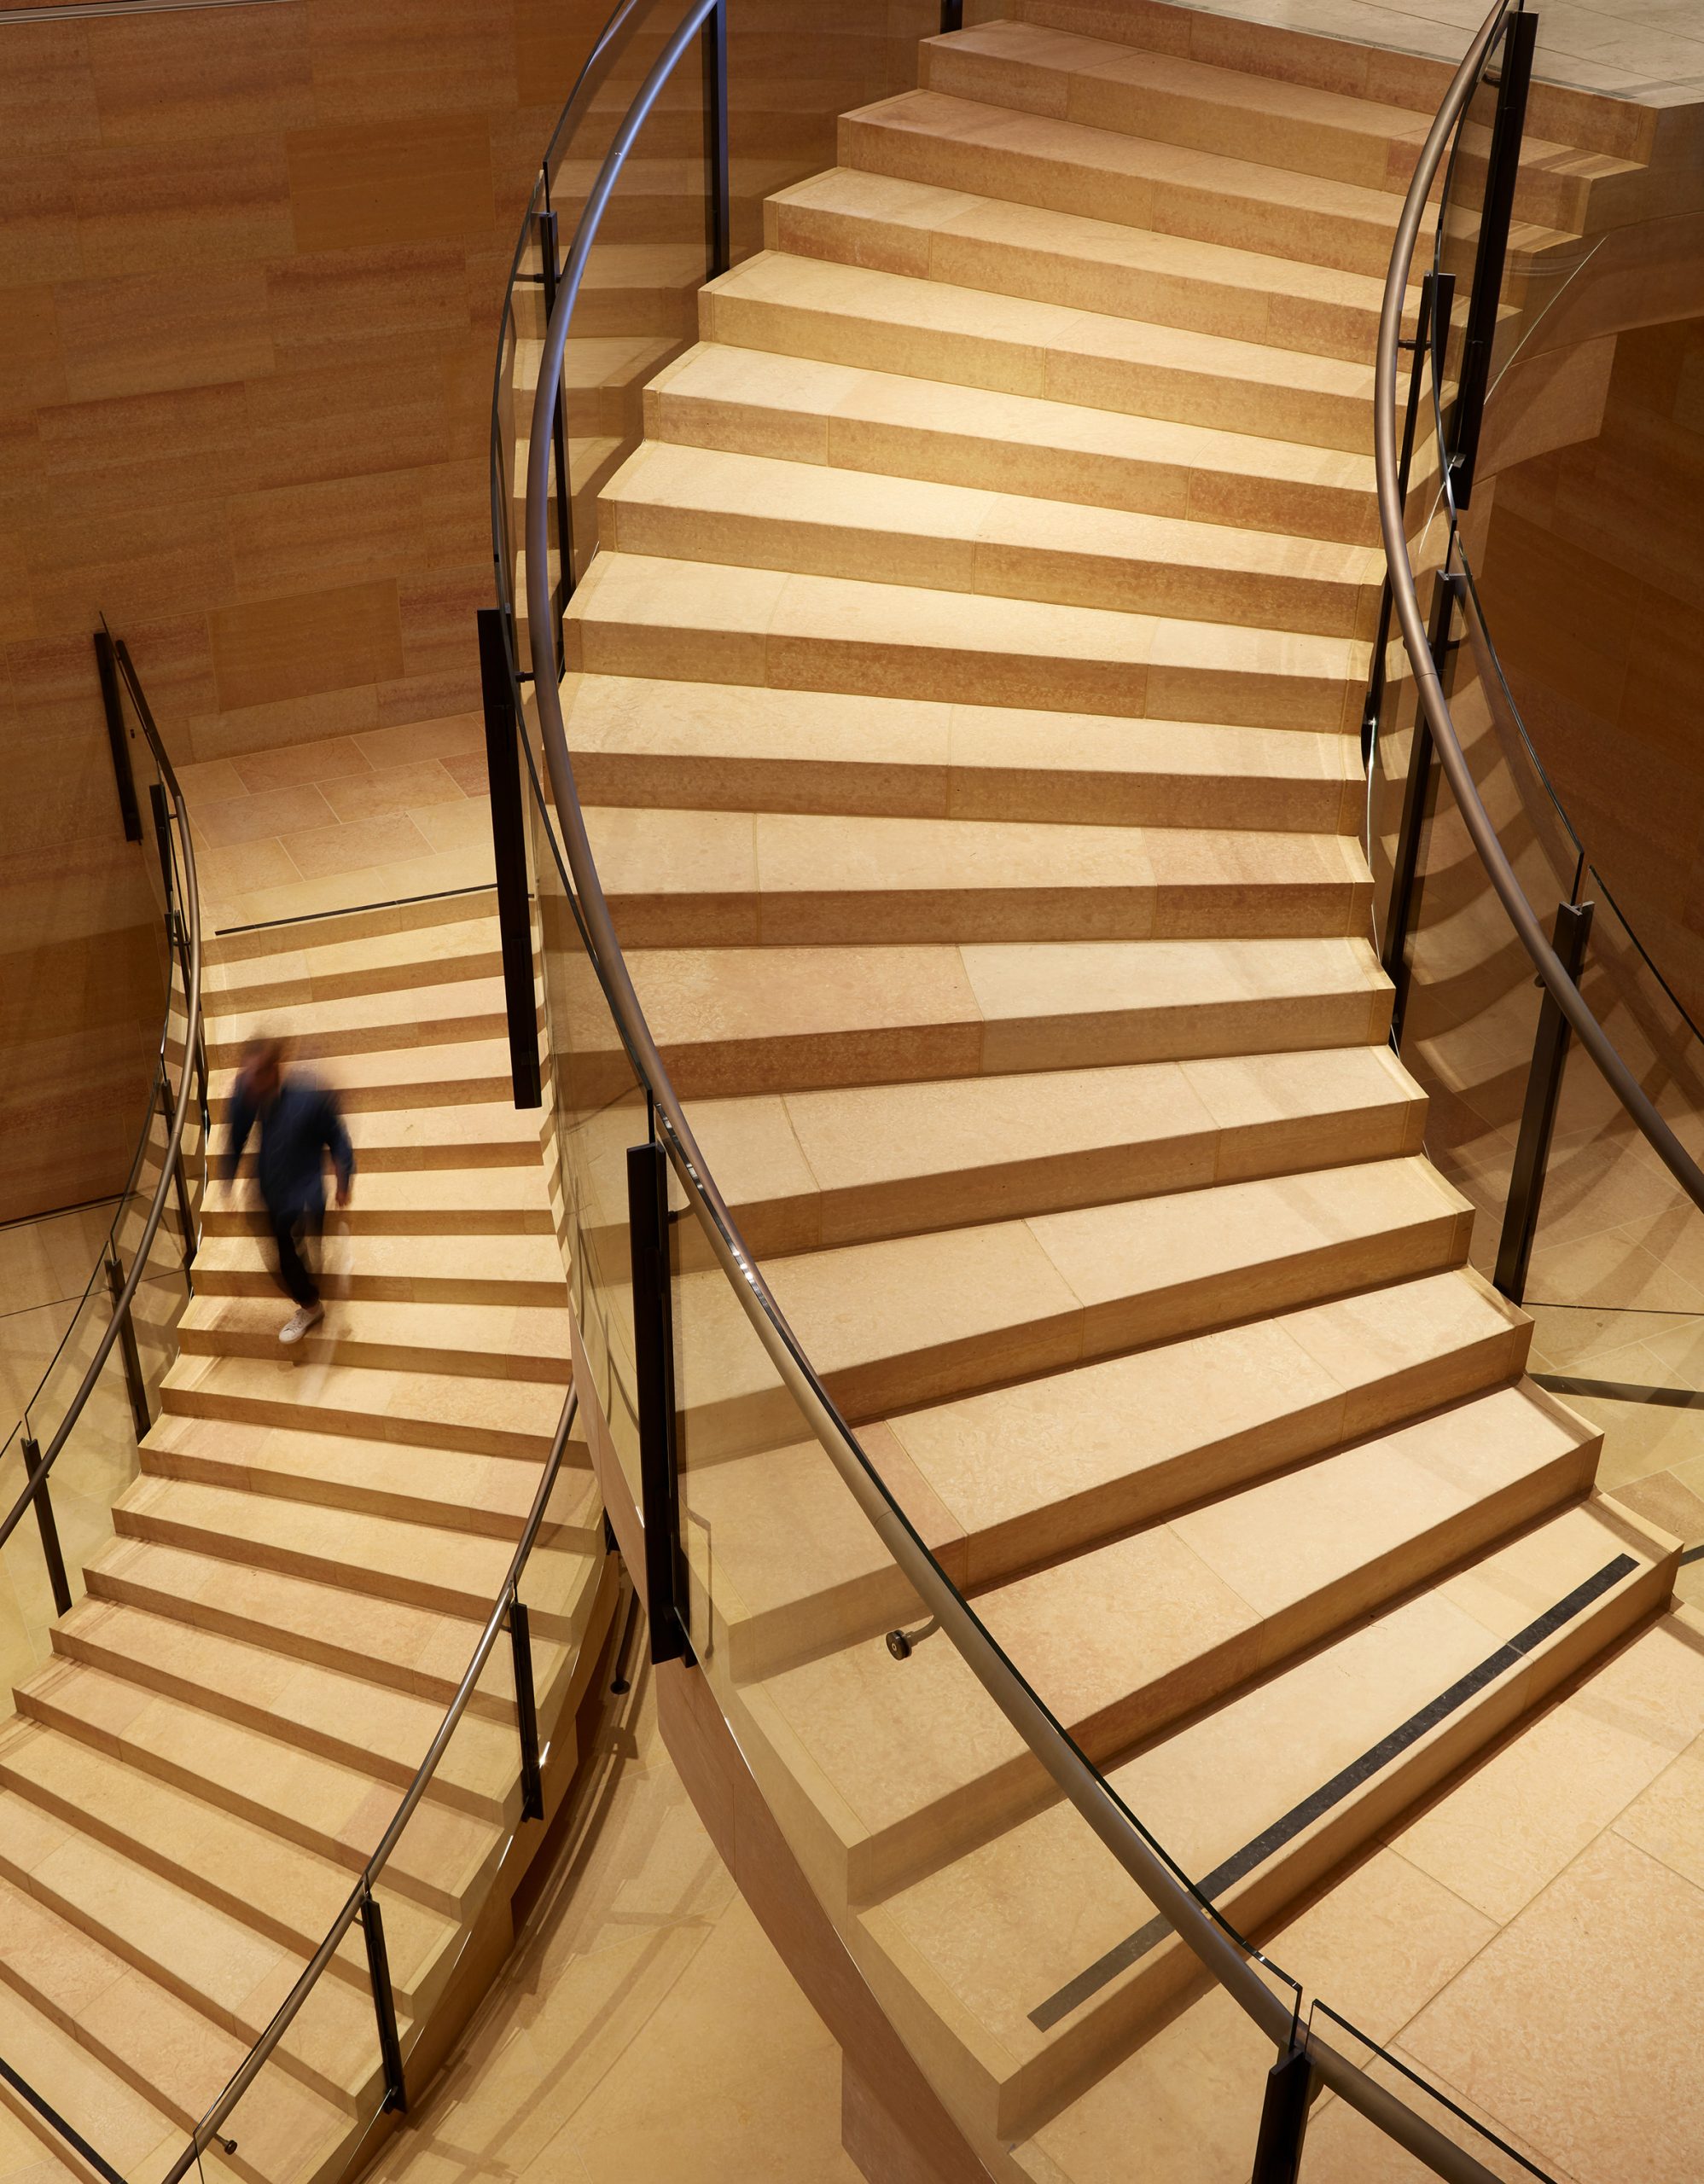 Kasota stone staircases designed by Frank Gehry